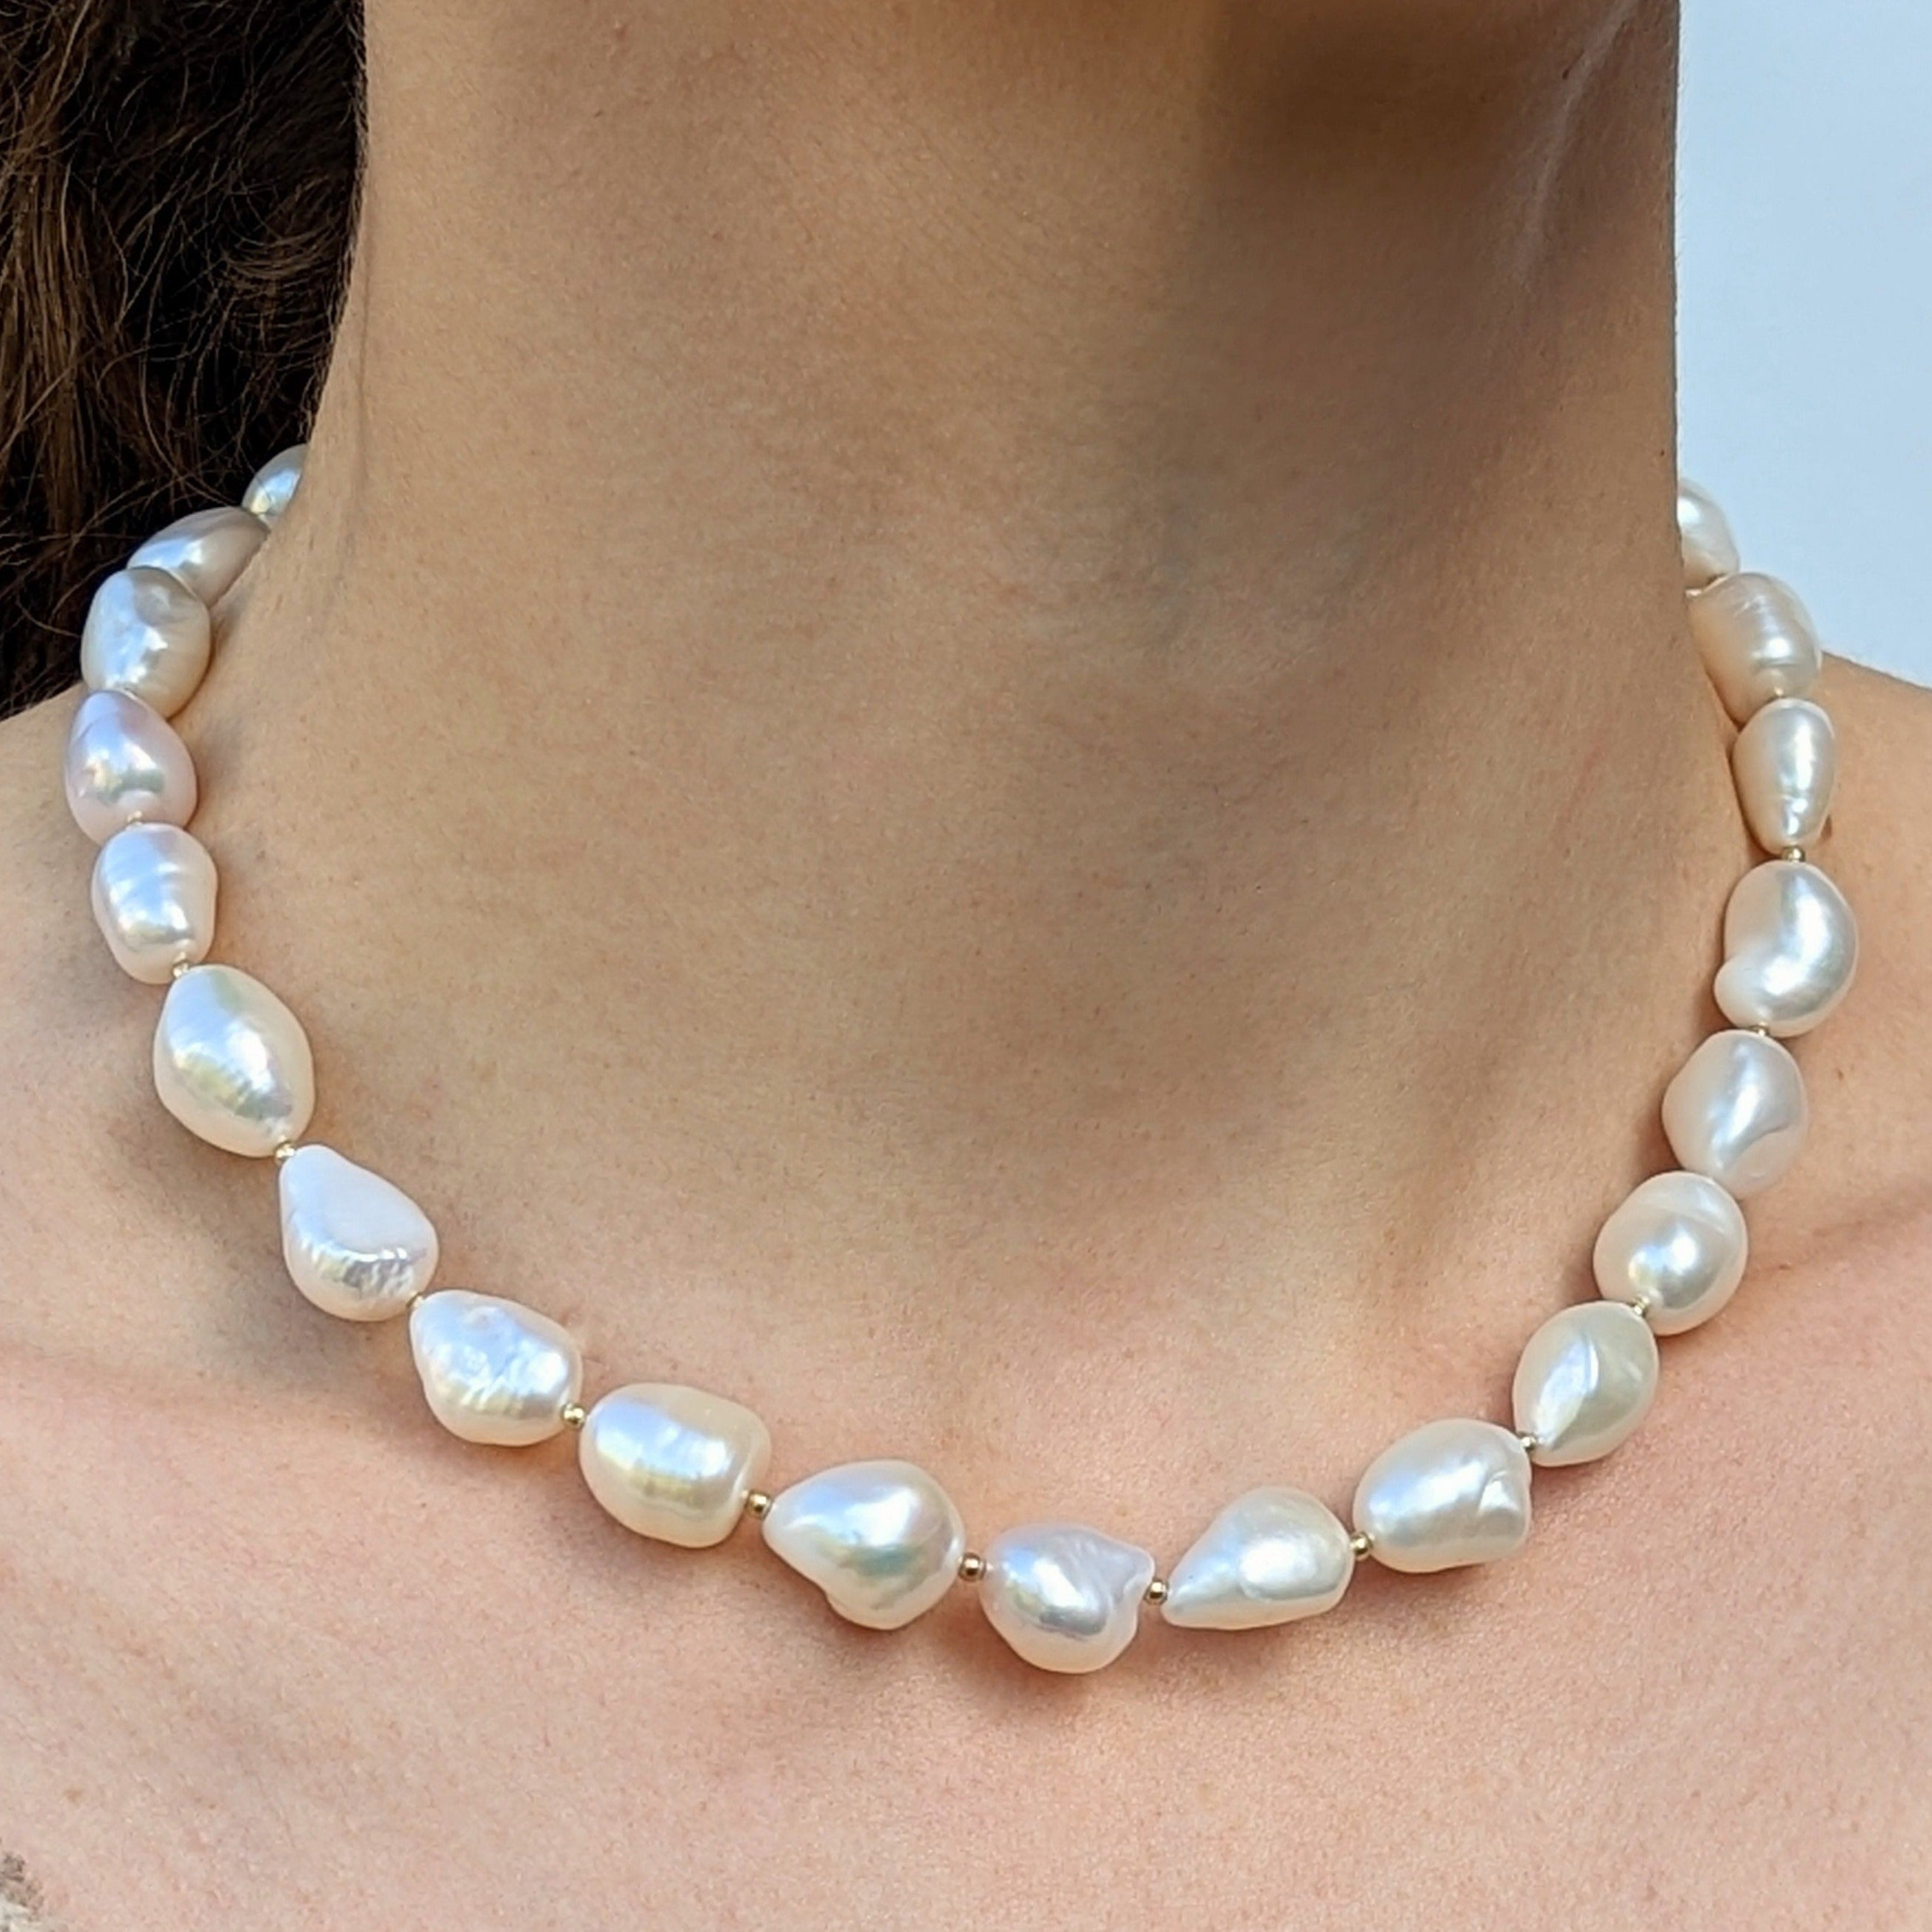 Neck wearing irregular shaped pearl and gold bead necklace